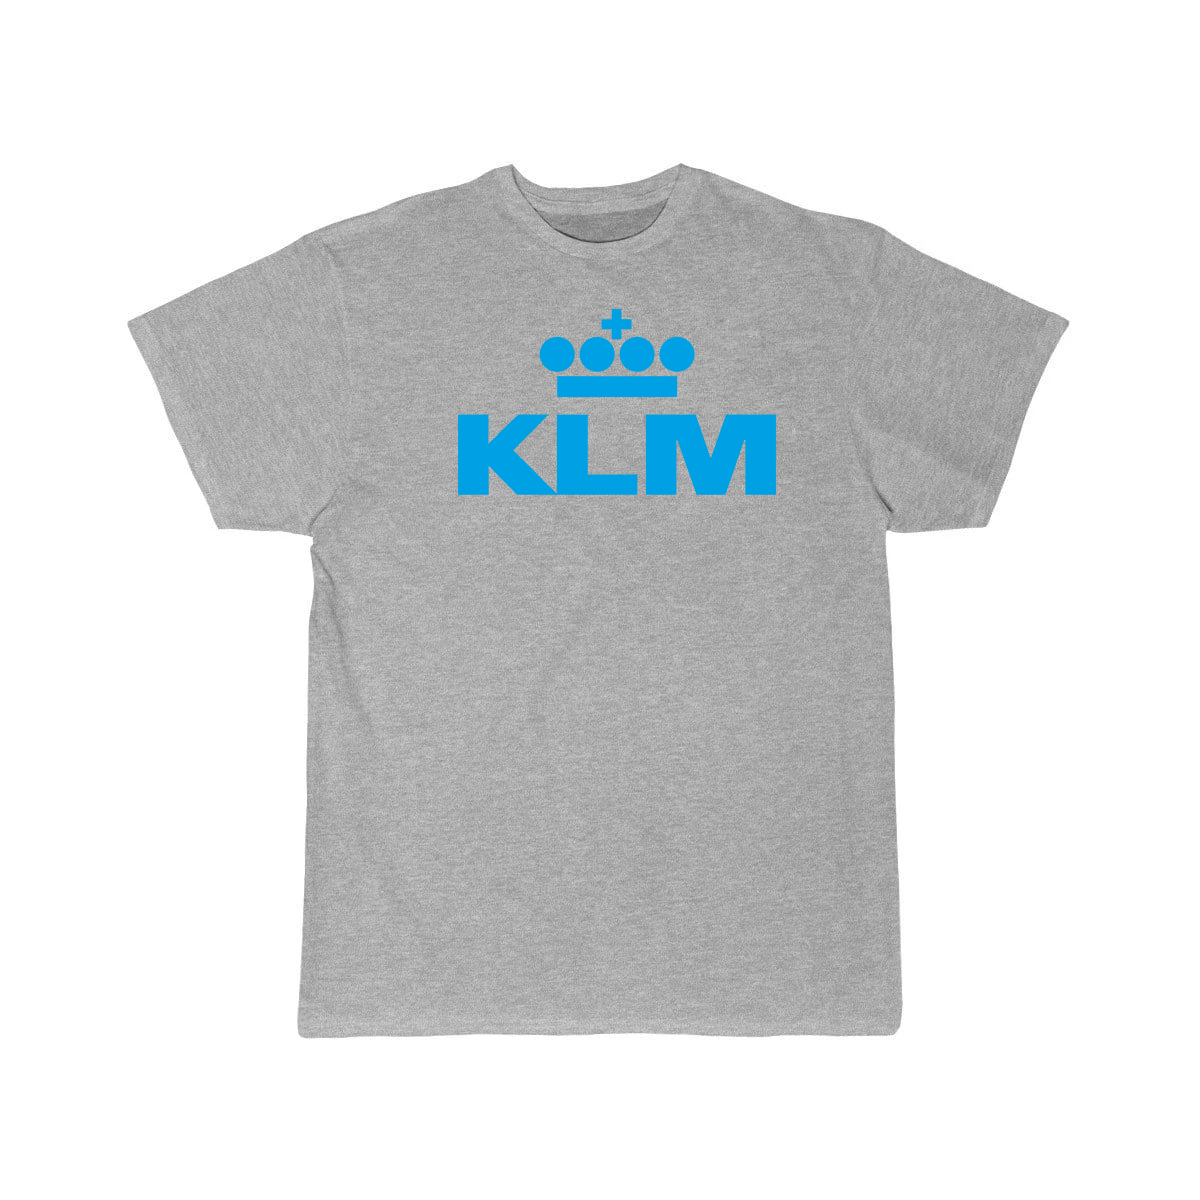 KLM AIRLINE T-SHIRT